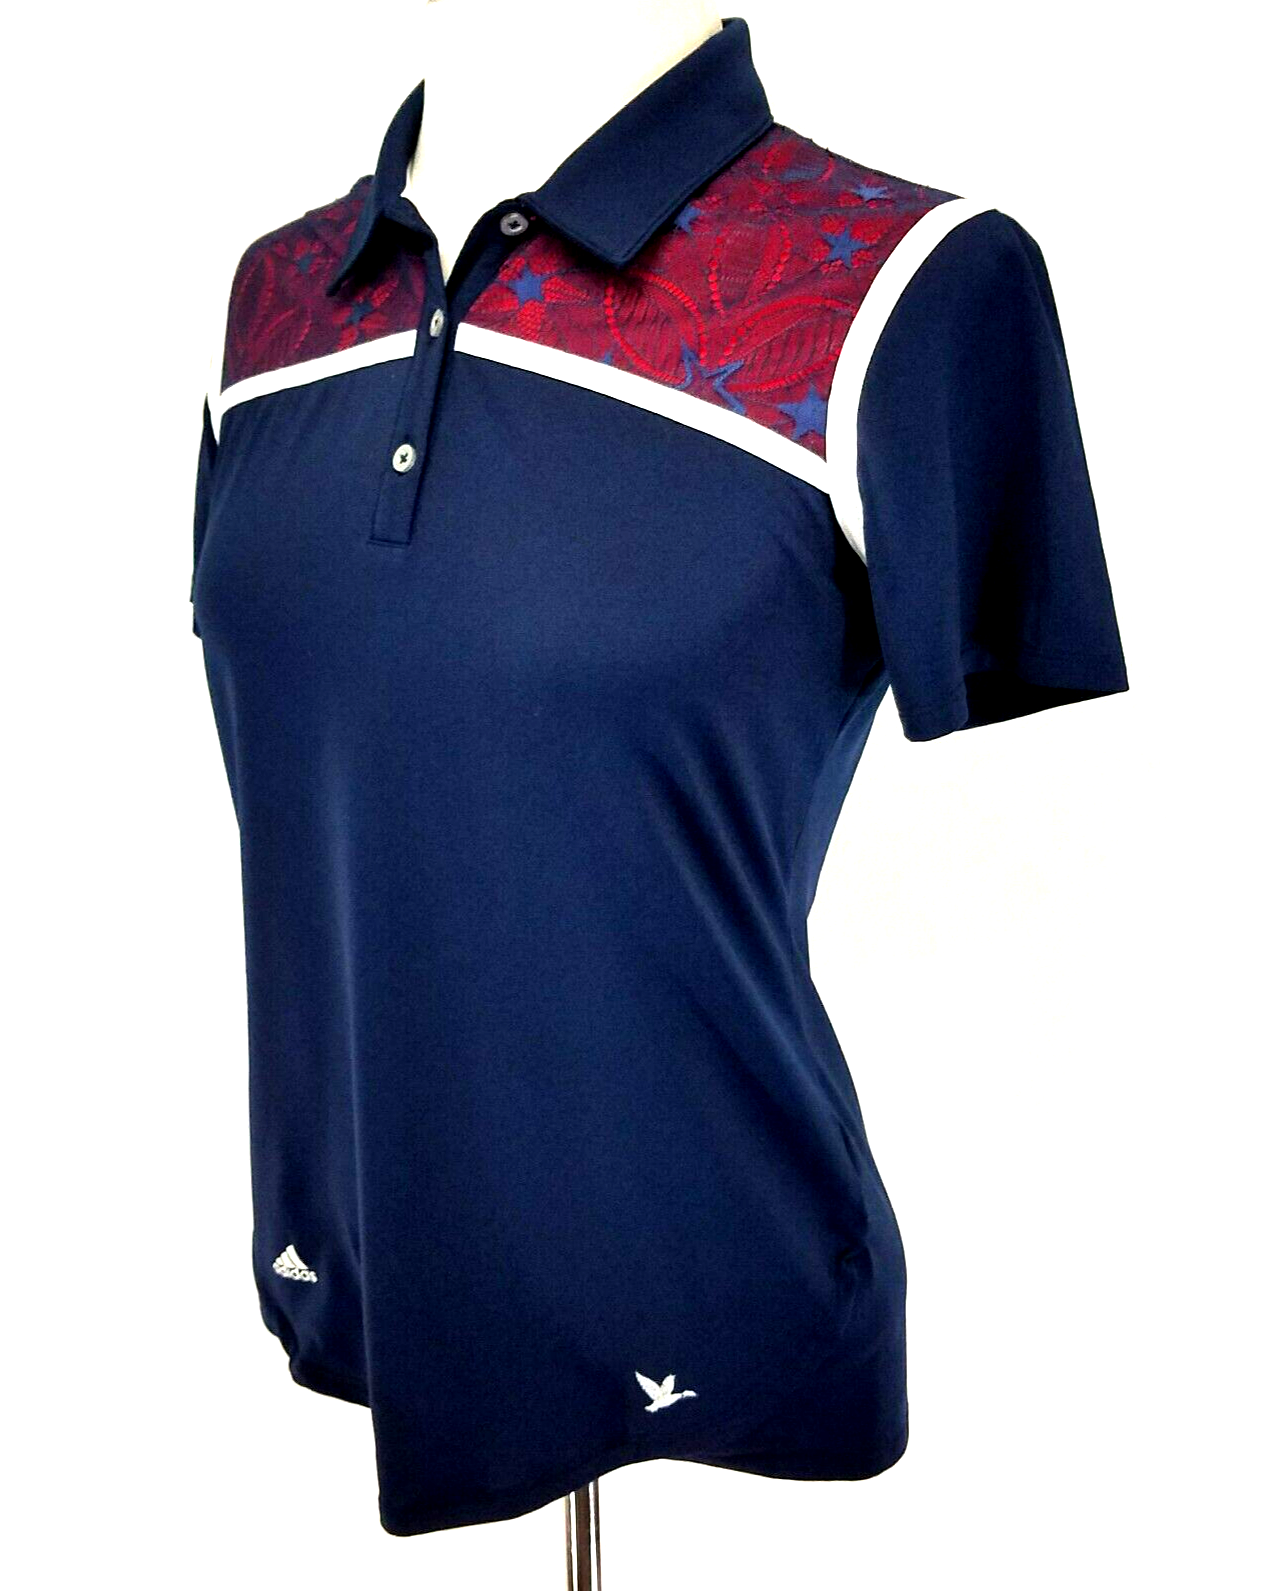 ADIDAS USA Golf Polo Shirt Navy Red White Lace Stars Flag AF2701 